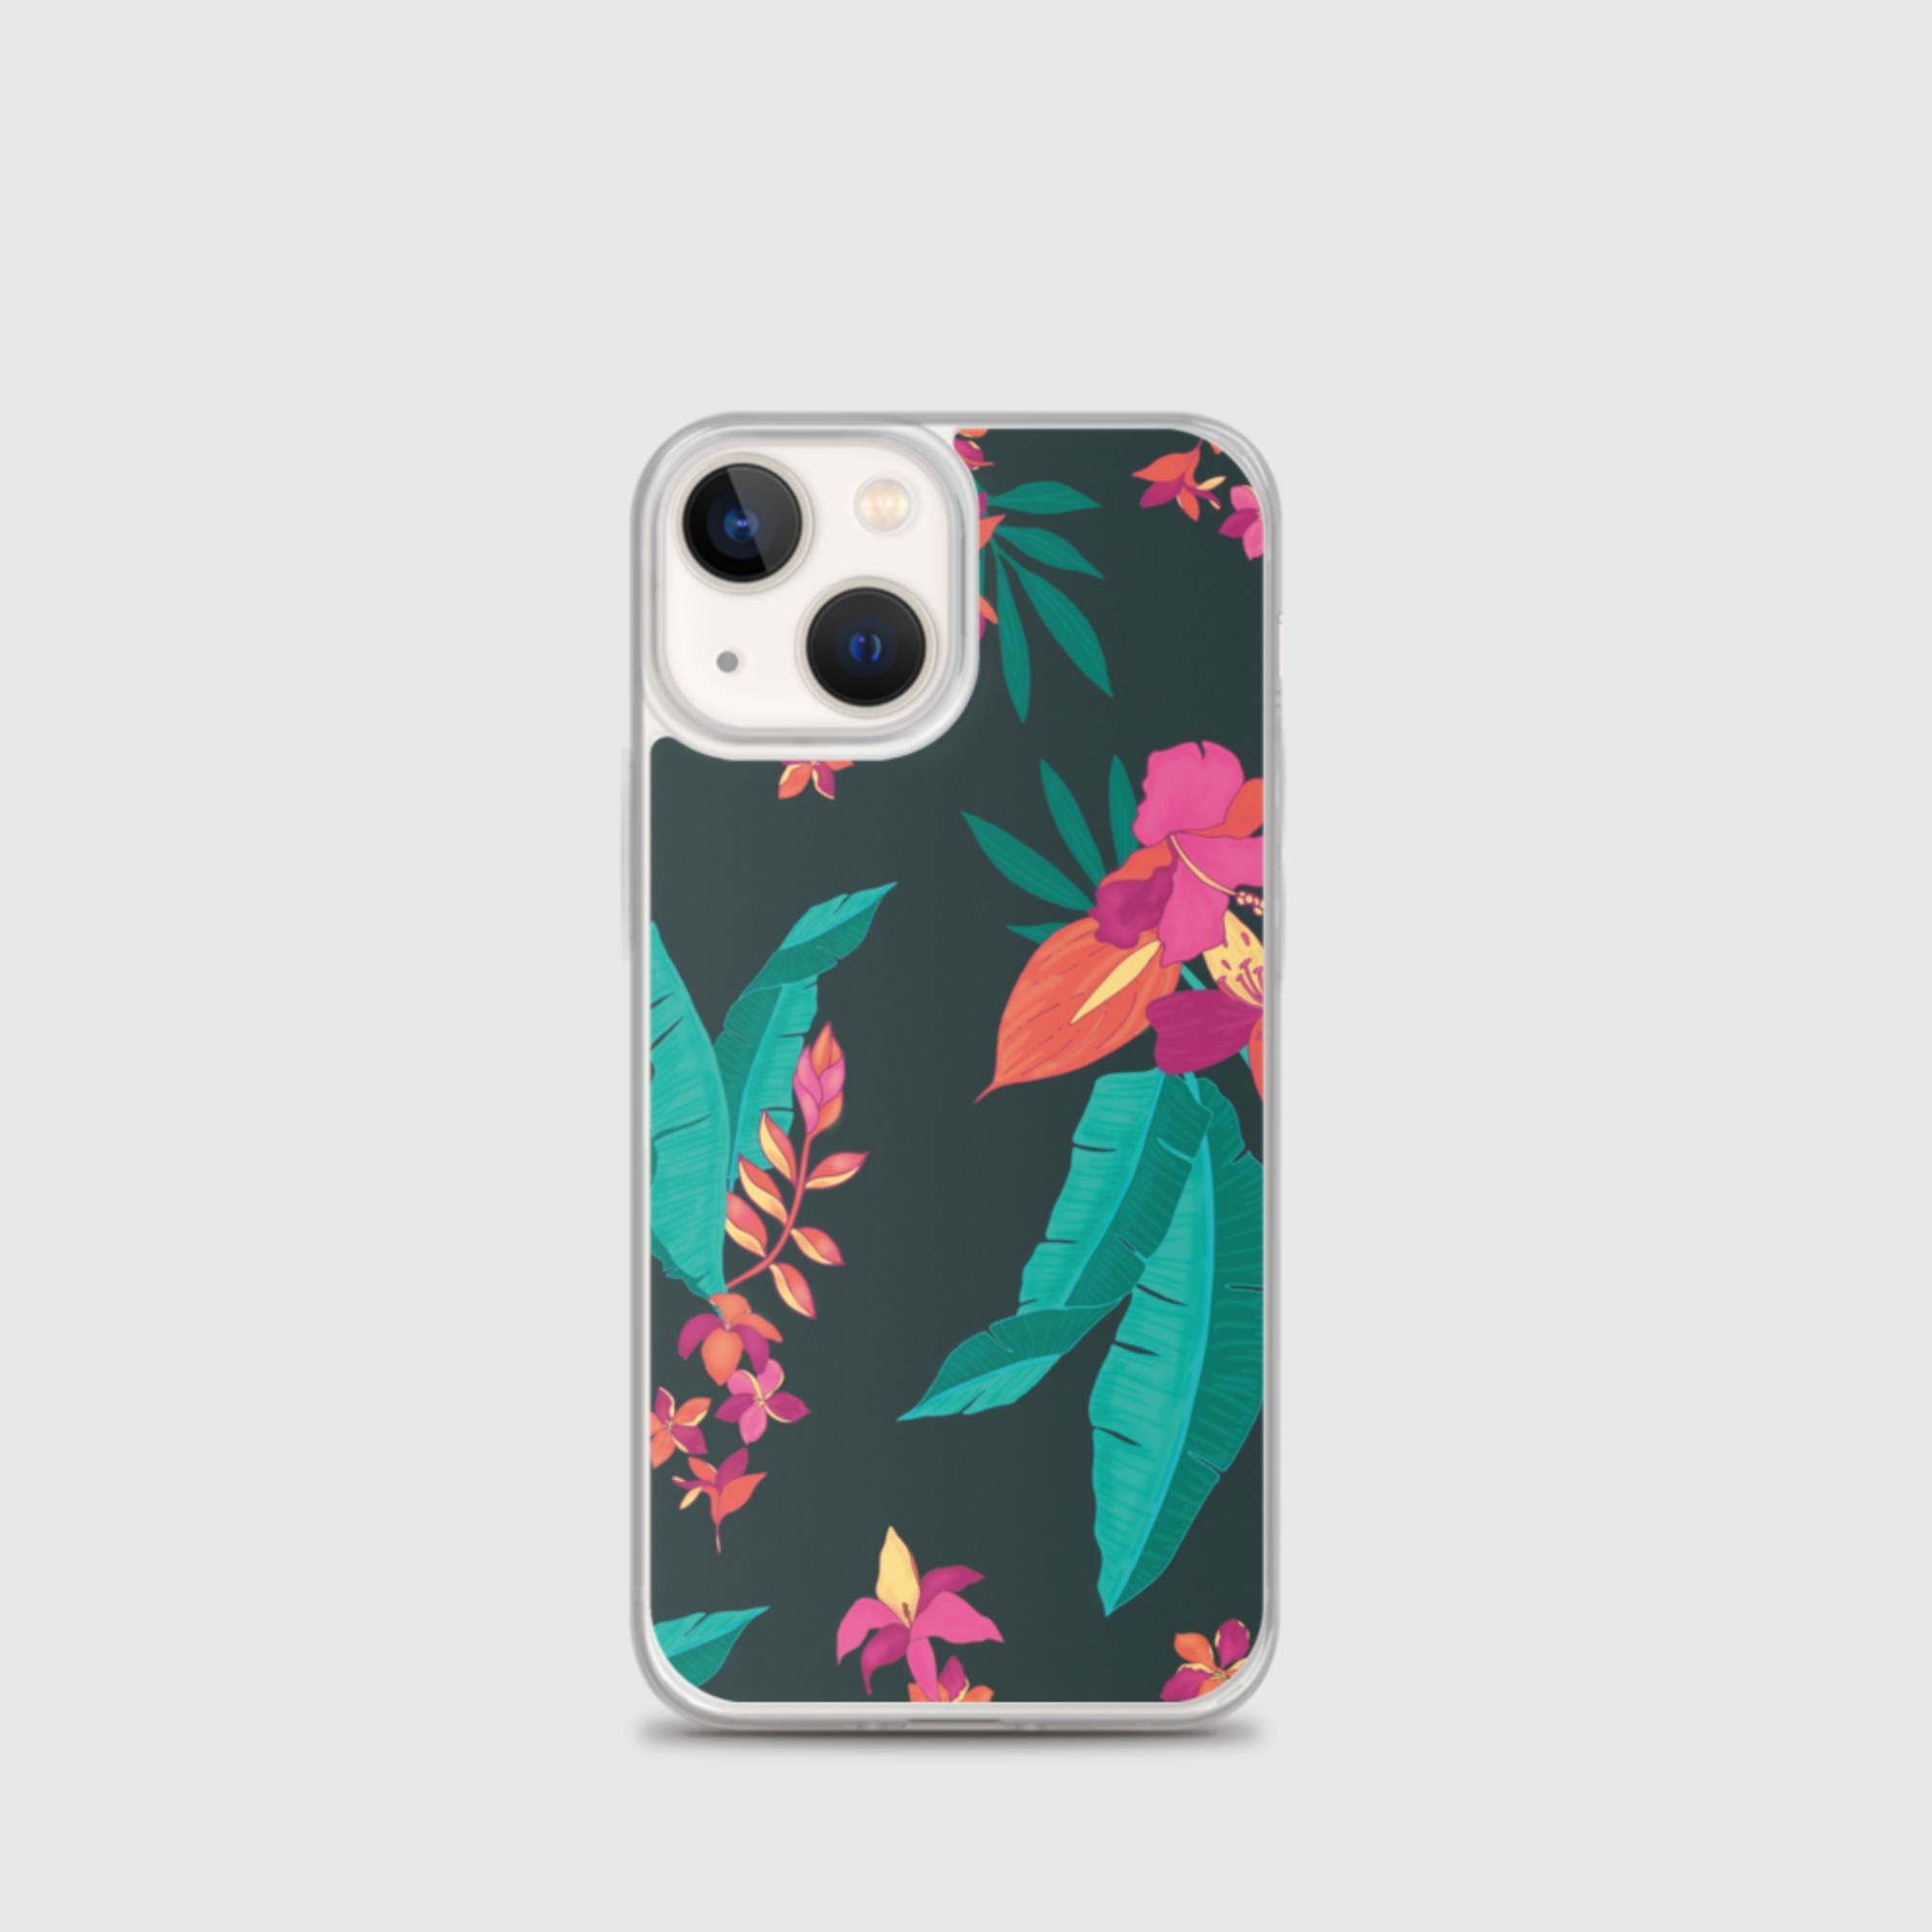 iPhone Case - Floral - Sunset Harbor Clothing